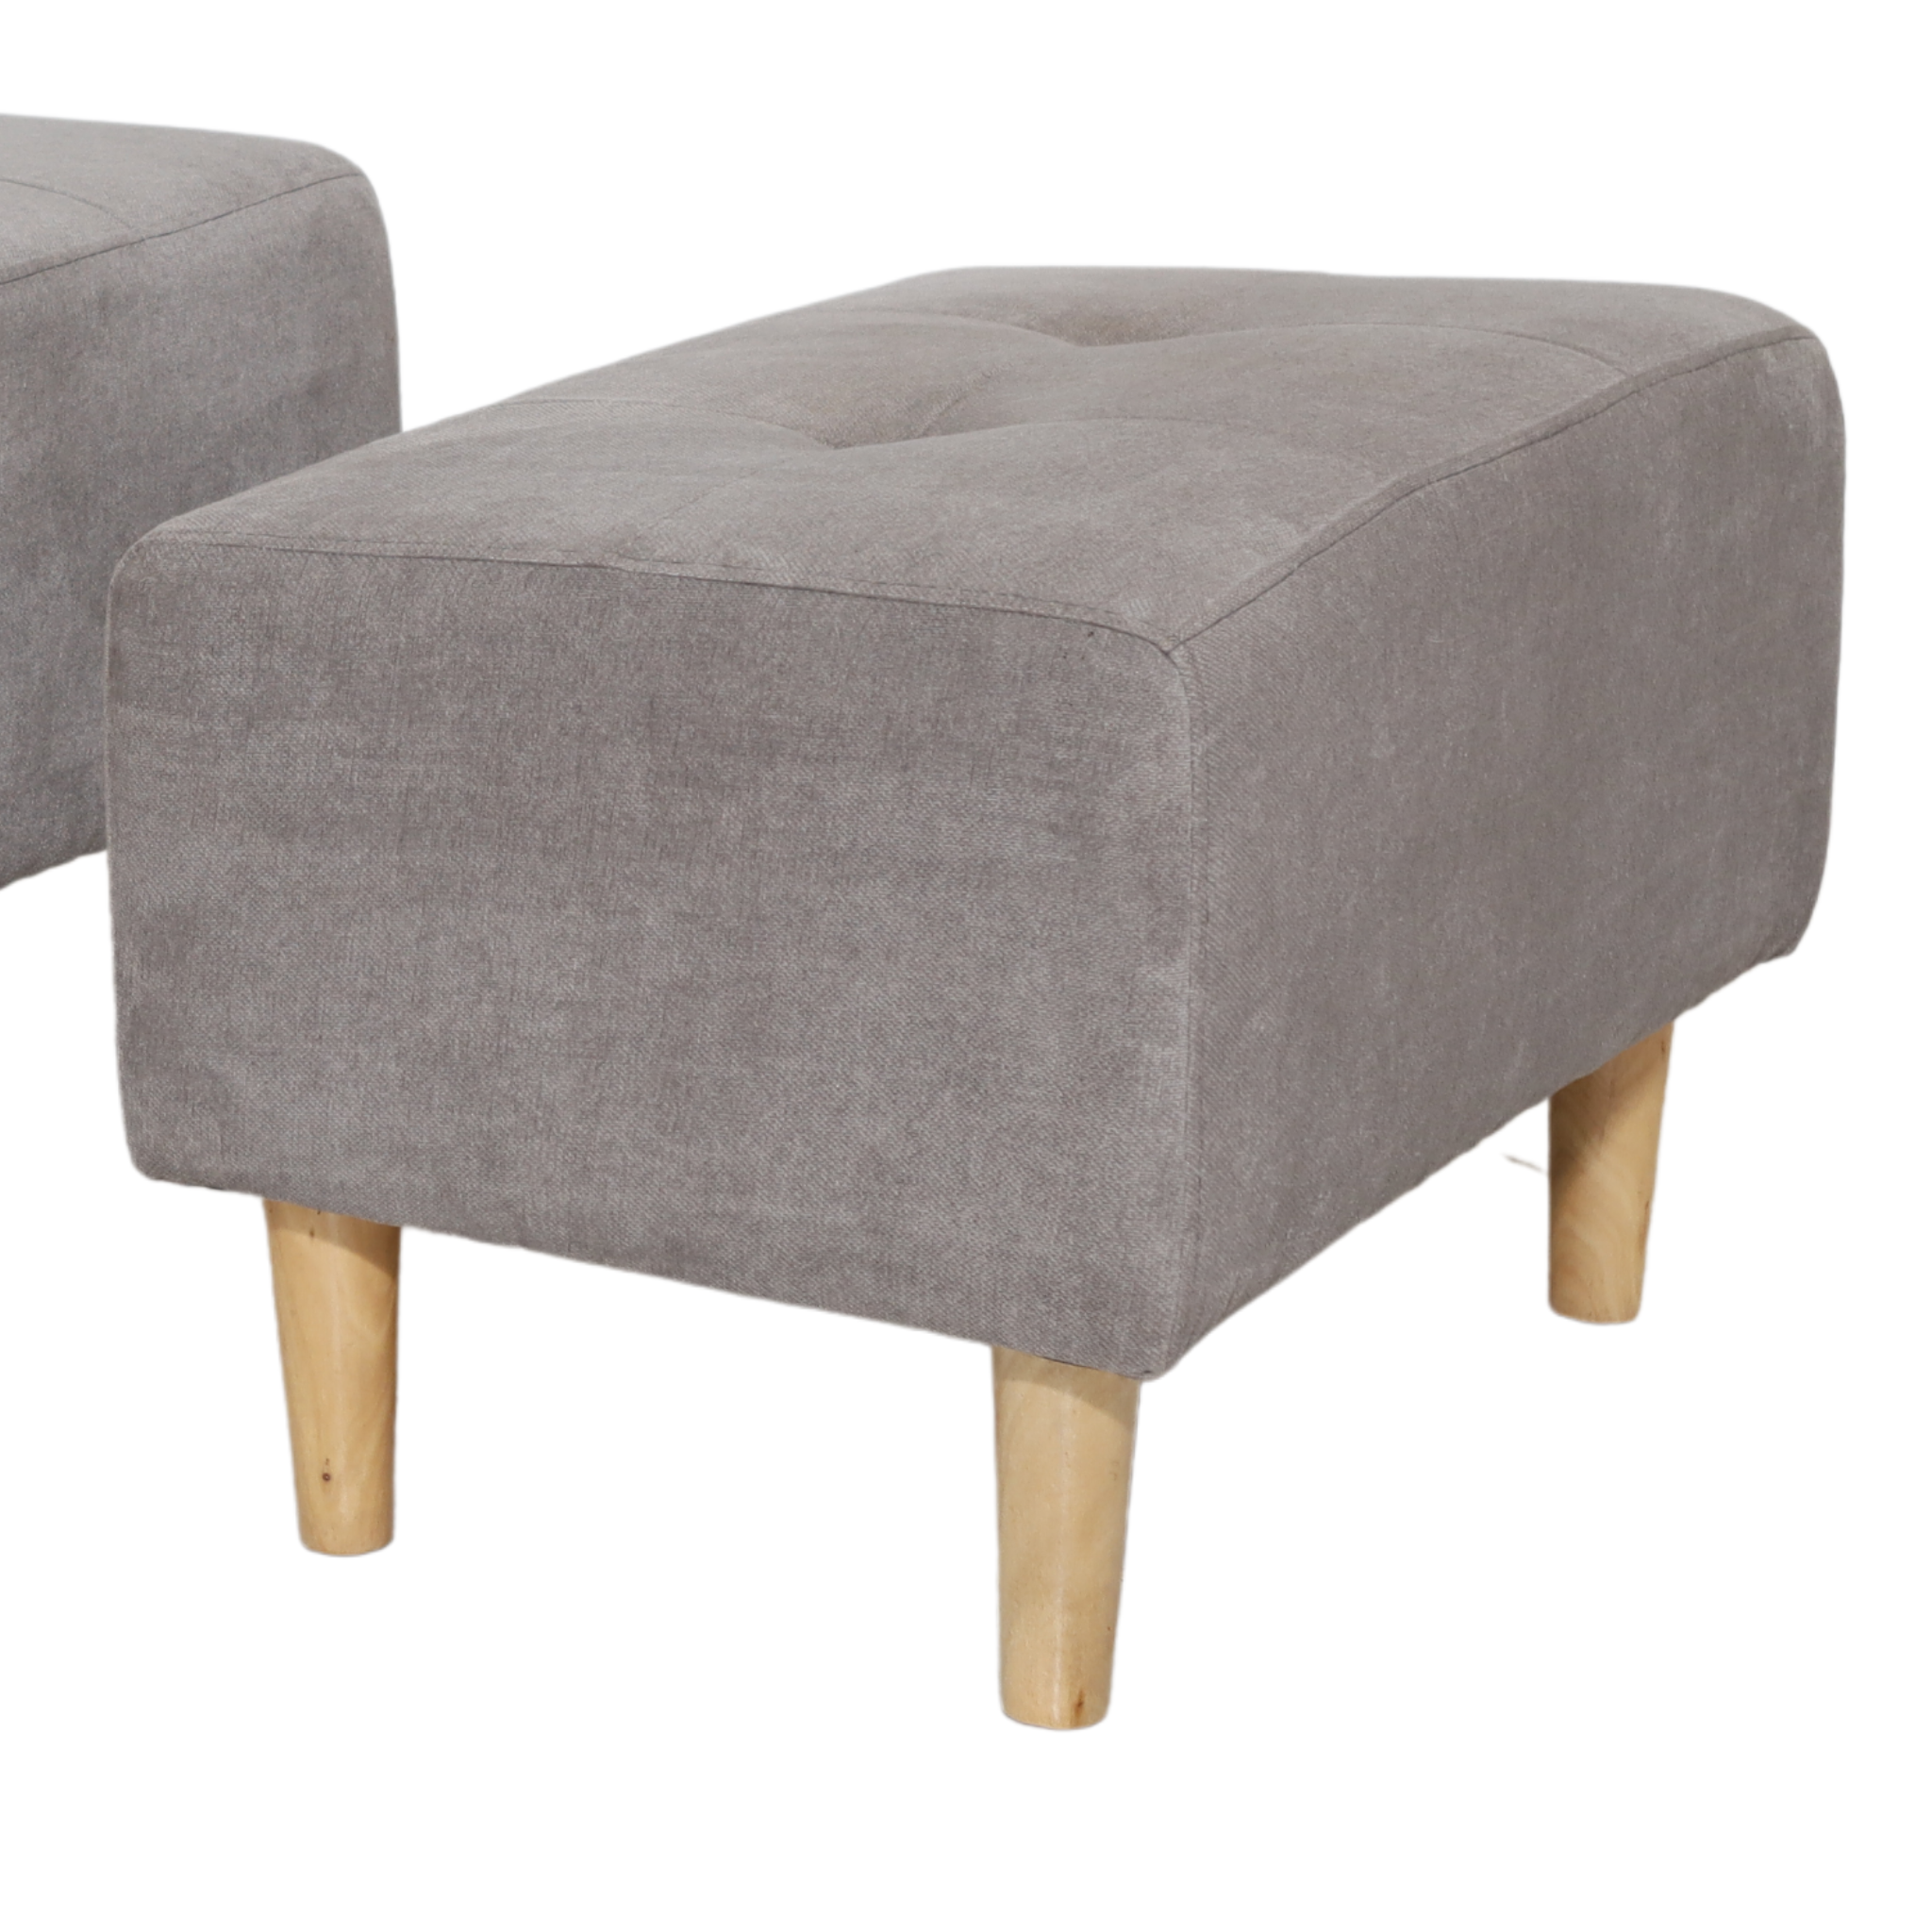 LIAM Fabric chair with Ottoman AF Home